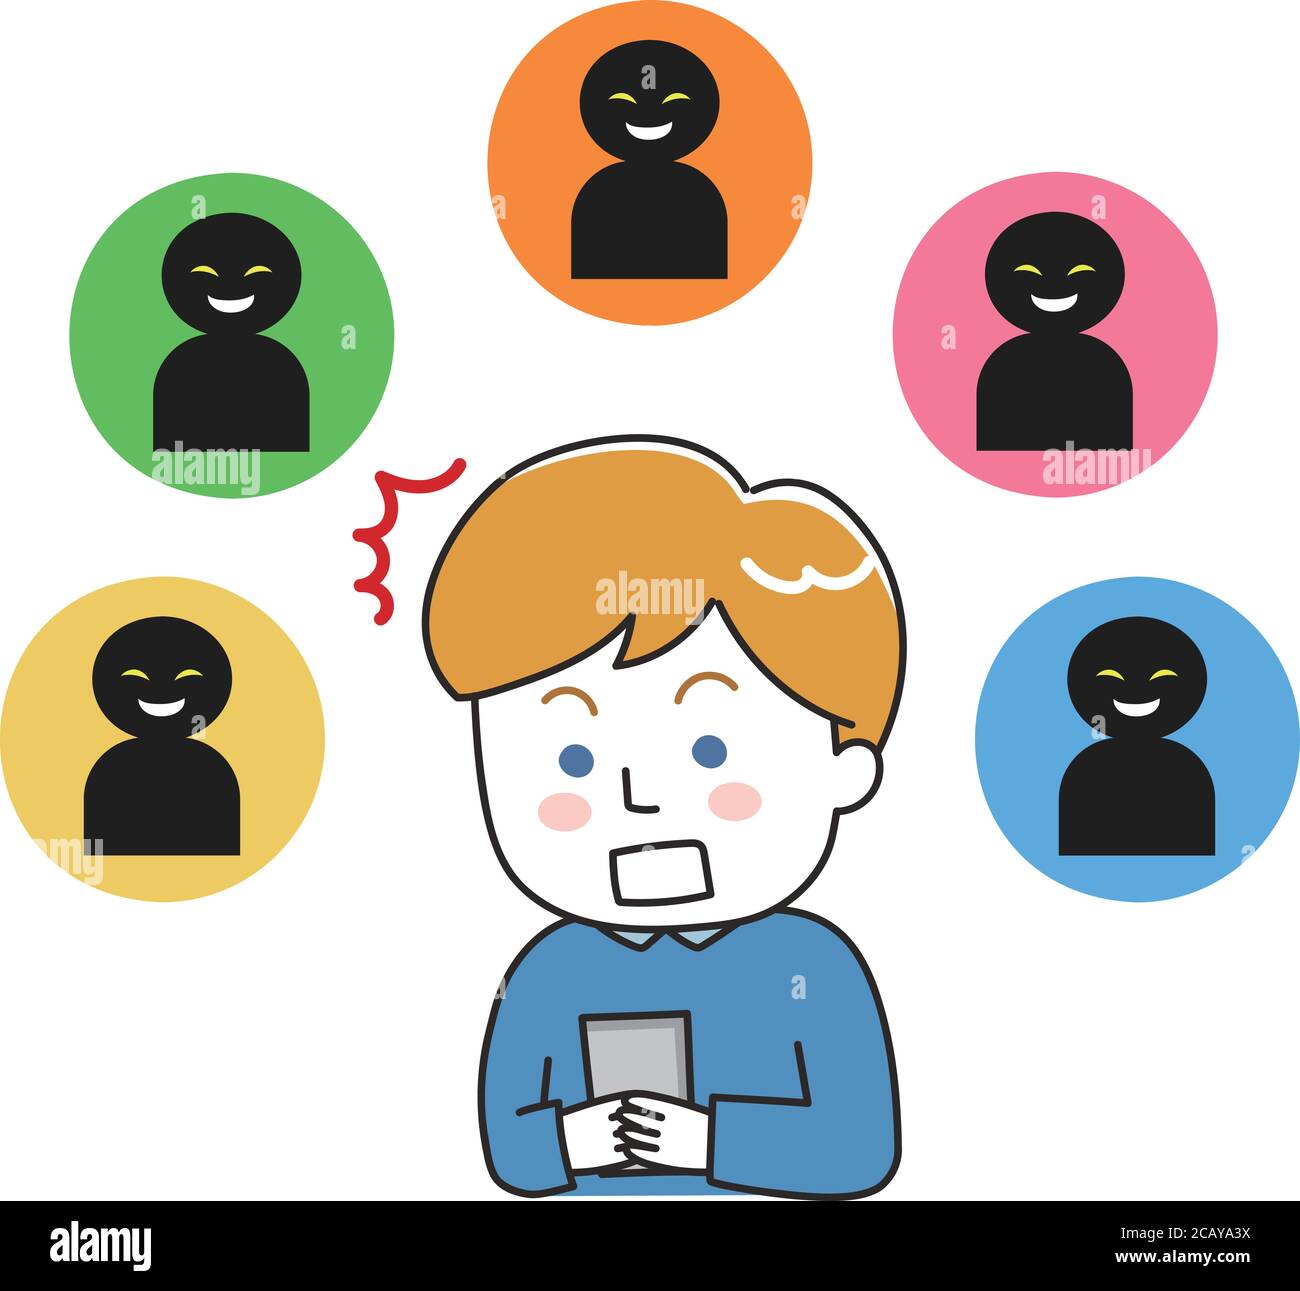 Shocked man looking at social media. Vector illustration isolated on white background. Stock Vector